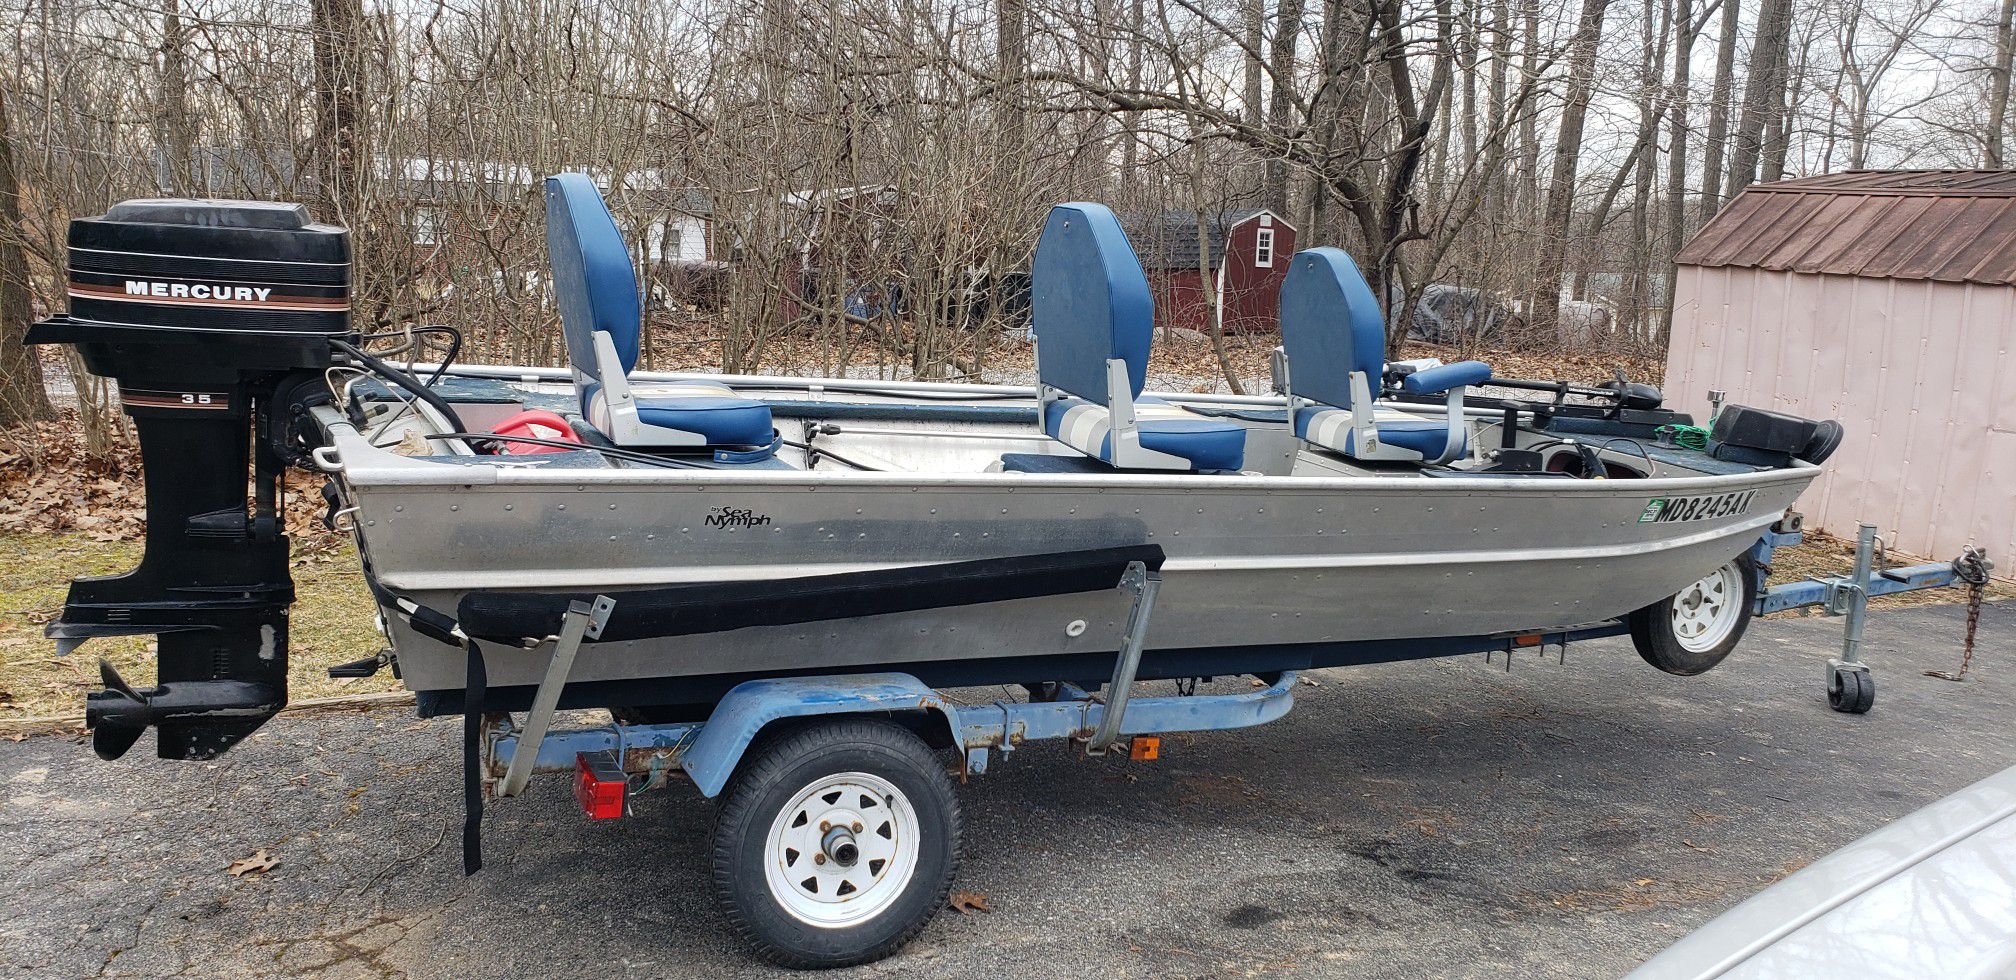 16ft Sea Nymph boat with Mercury motor